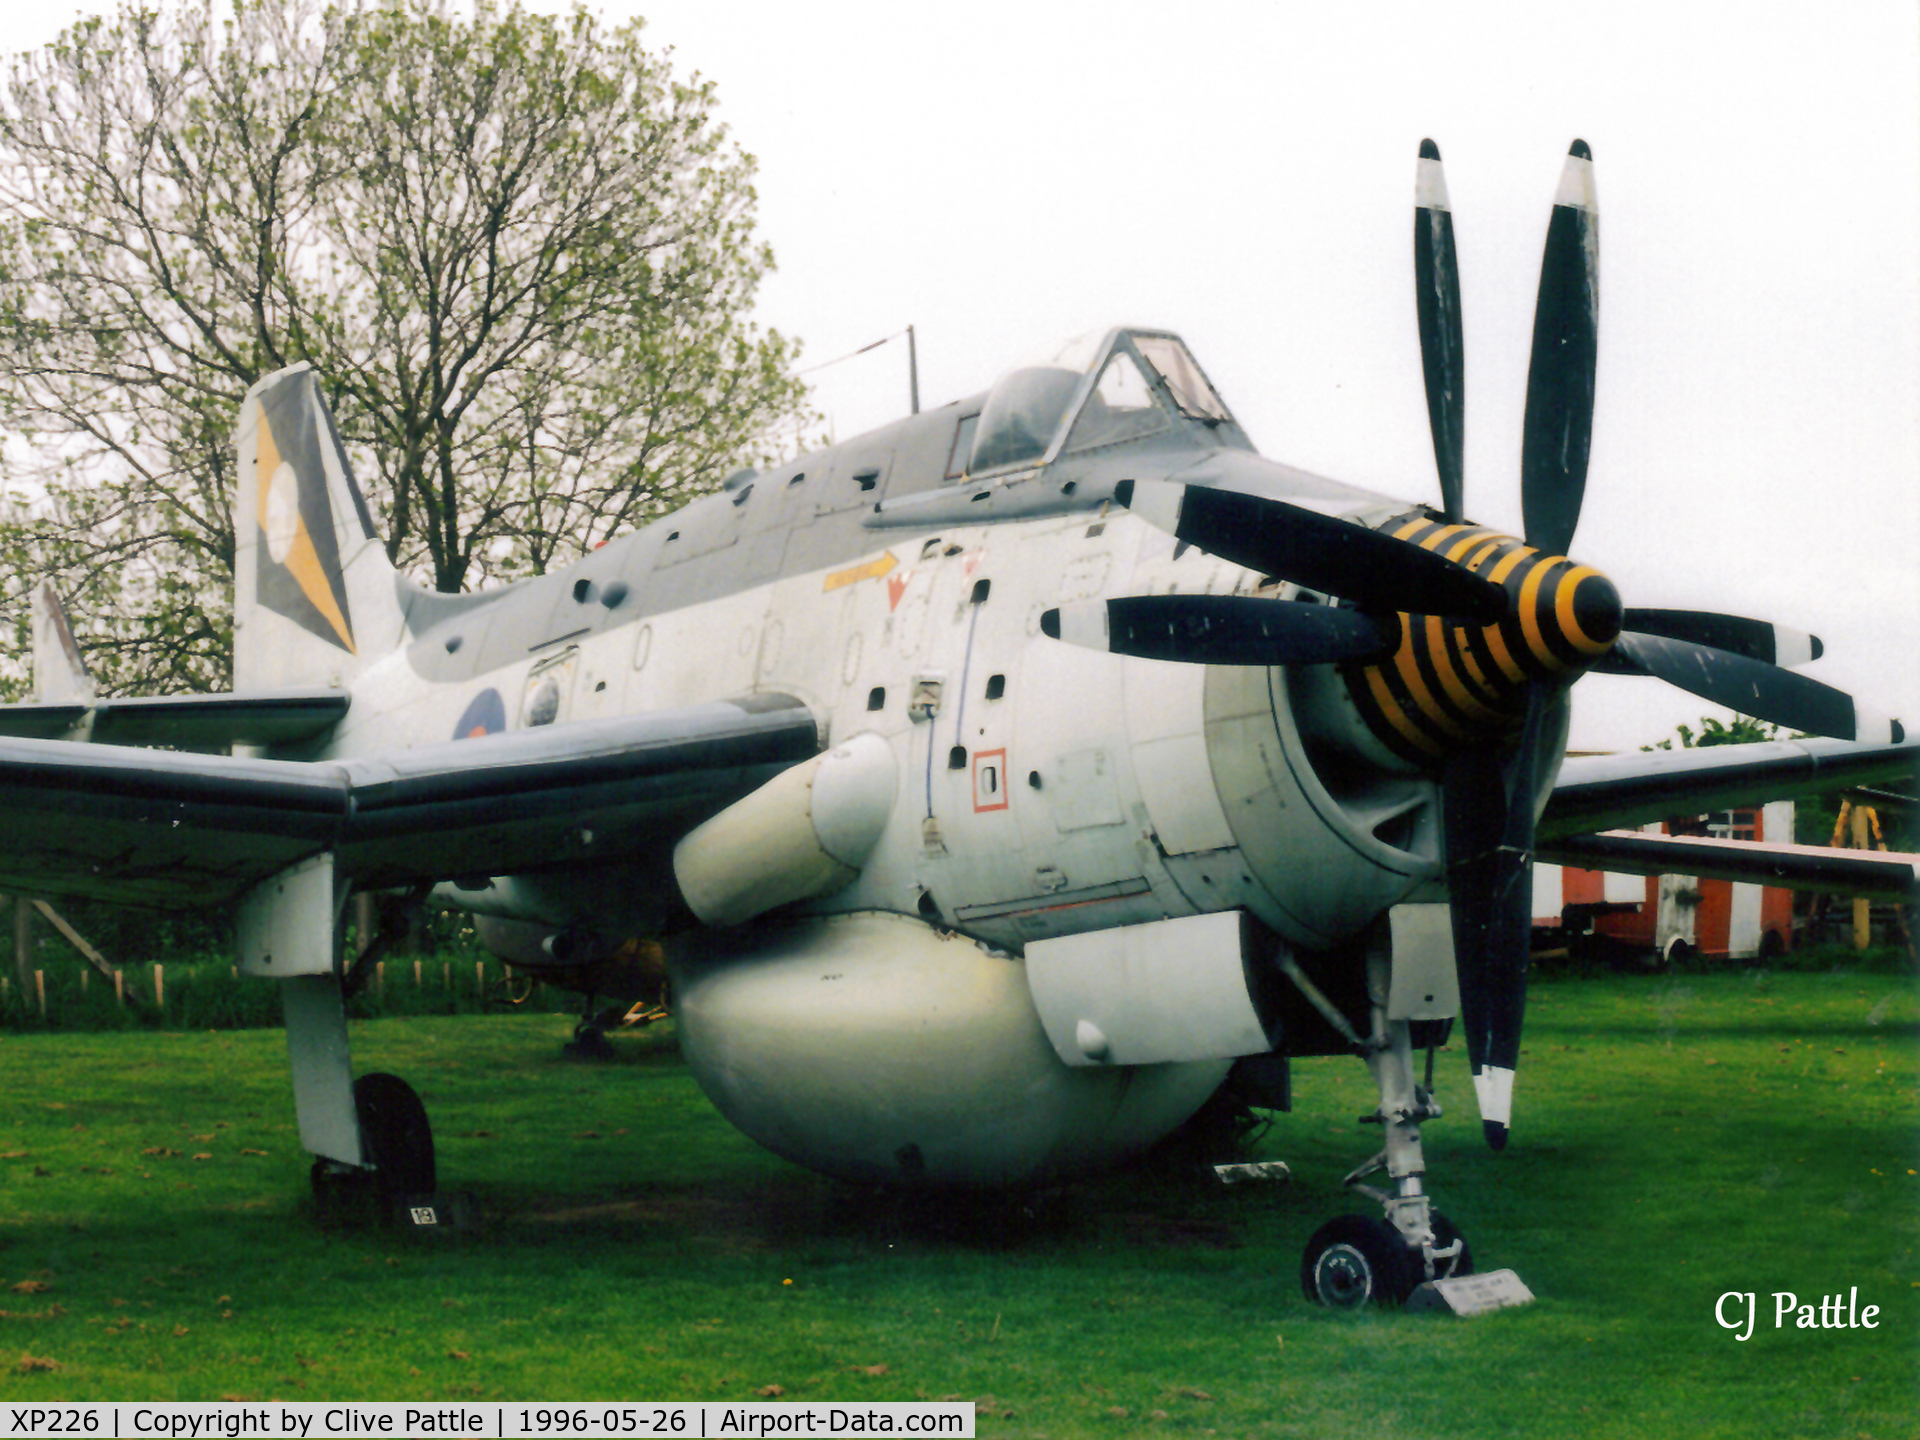 XP226, 1962 Fairey Gannet AEW.3 C/N F9468, Scanned from print - Gannet AEW.3 XP226 displayed outside at Winthorpe in May '96.